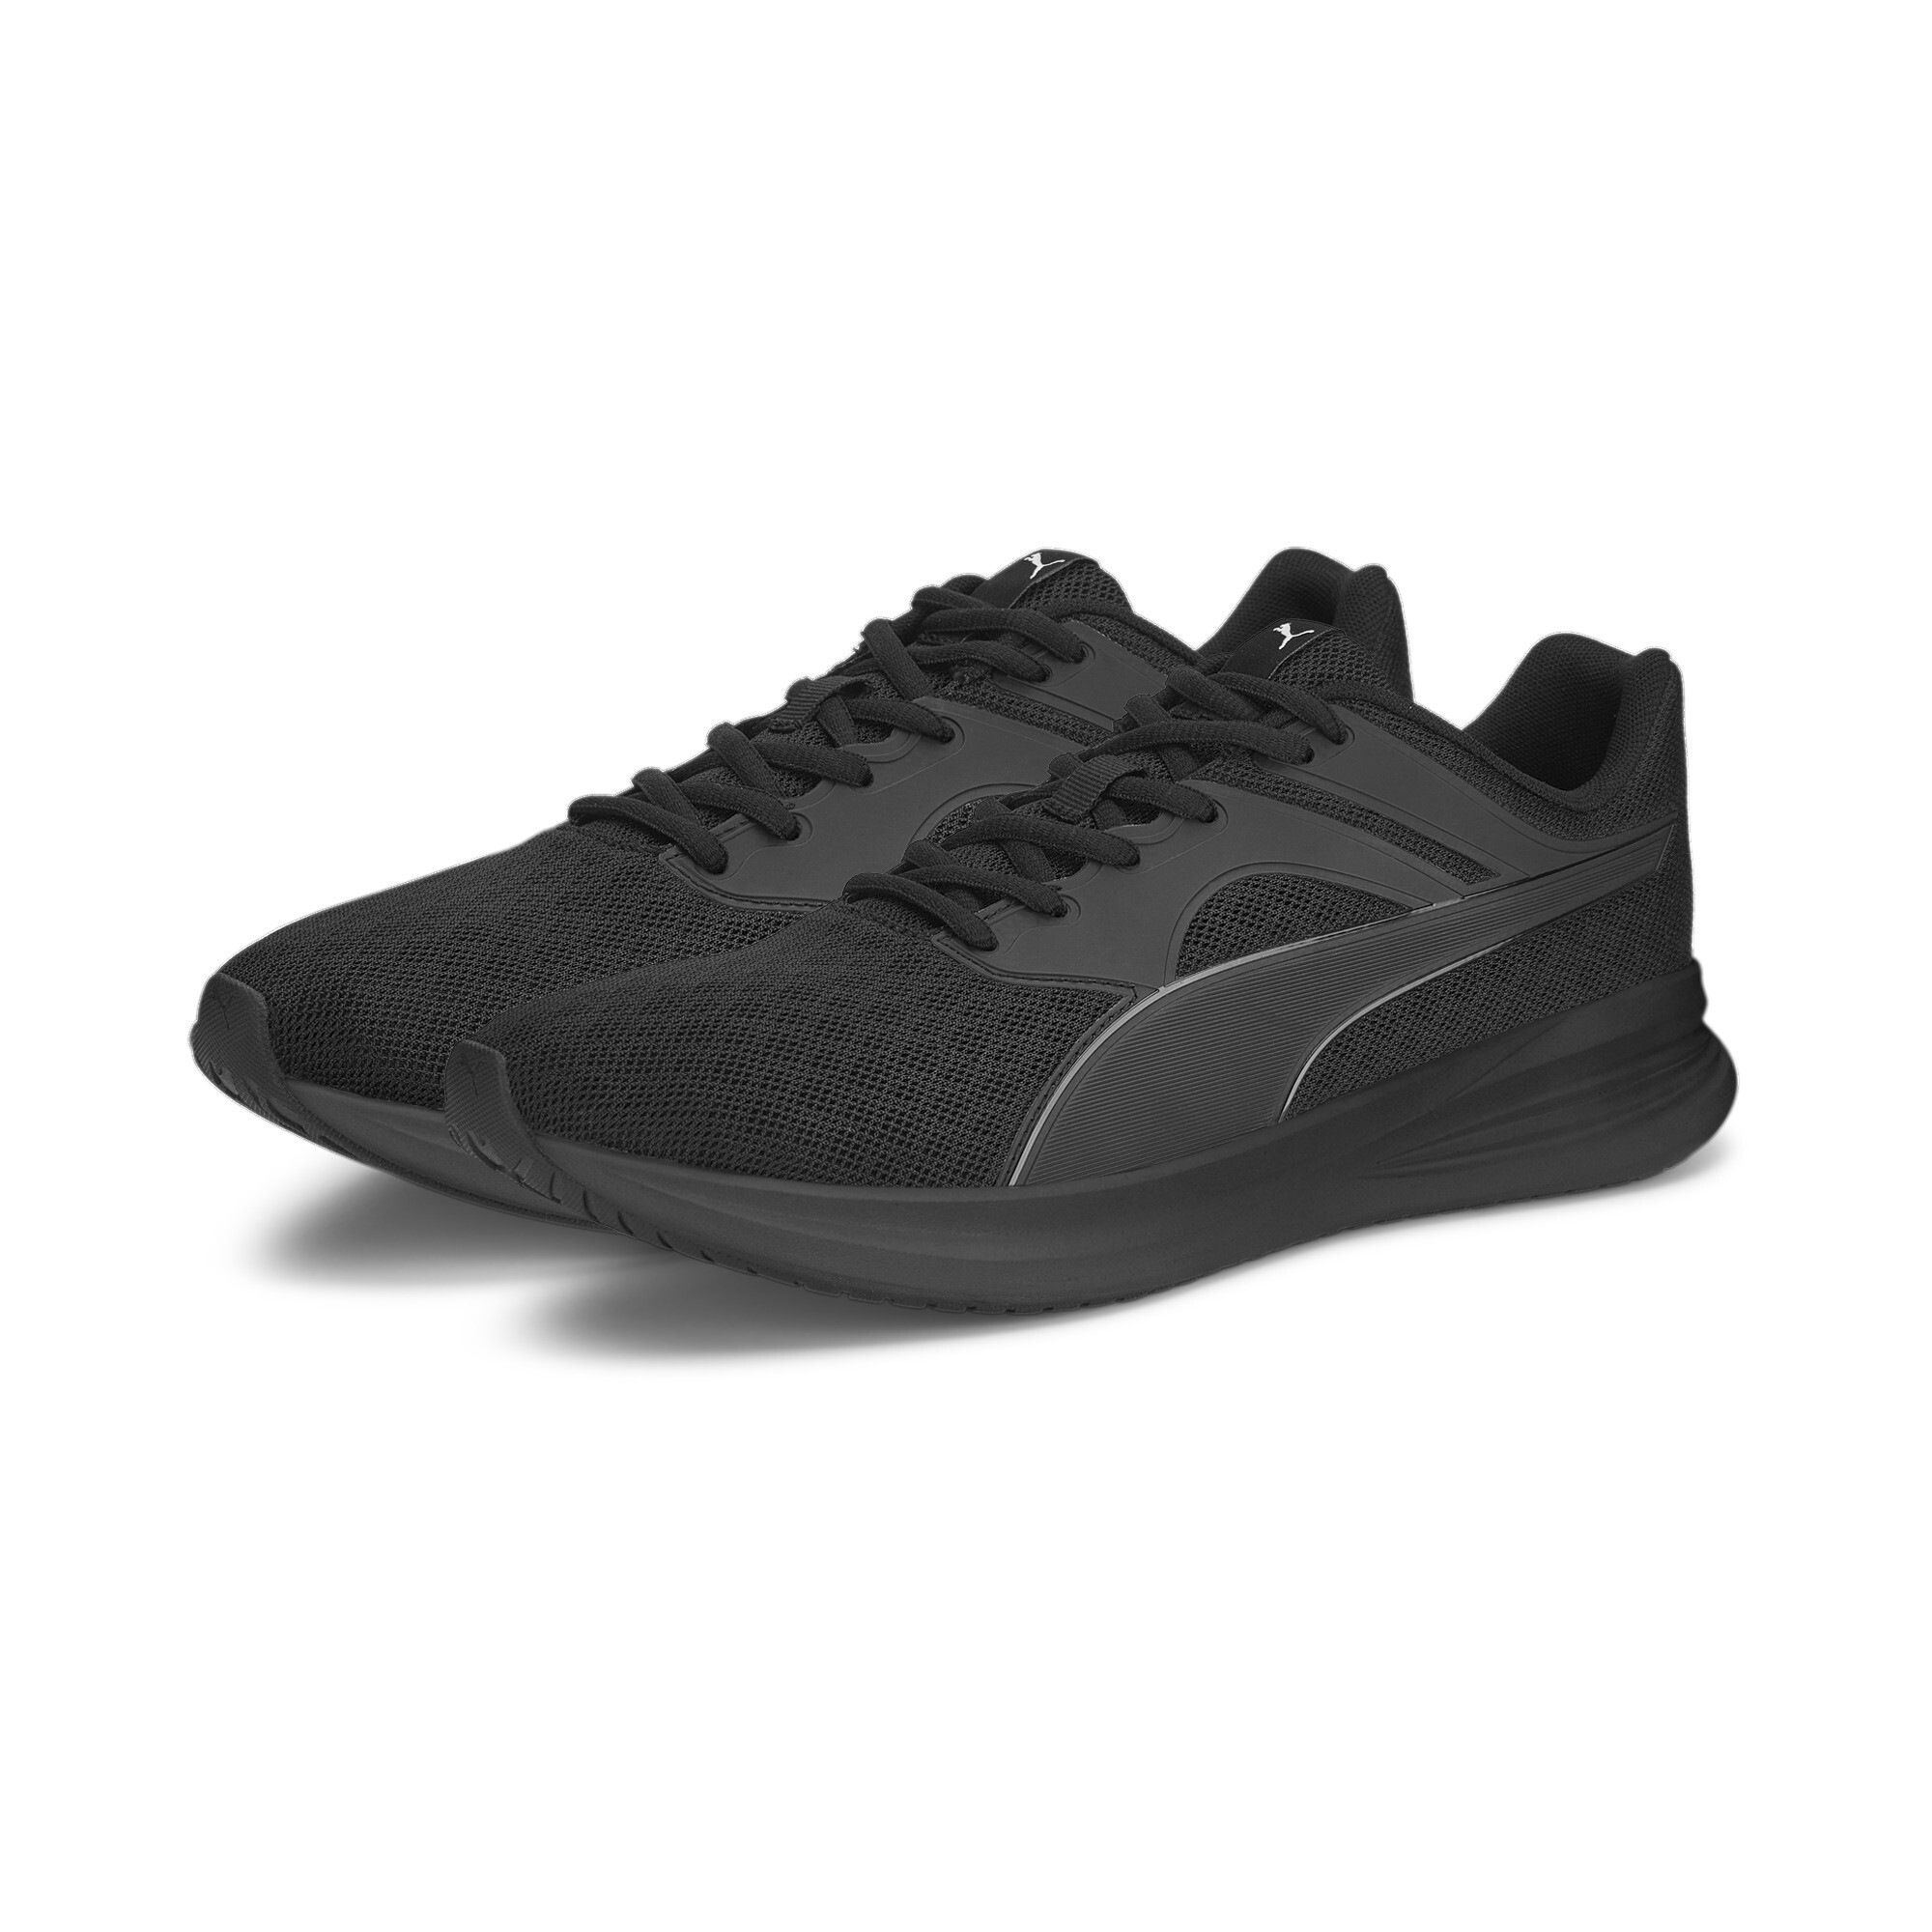 Puma Transport Running Shoes, Black, Size 40, Shoes